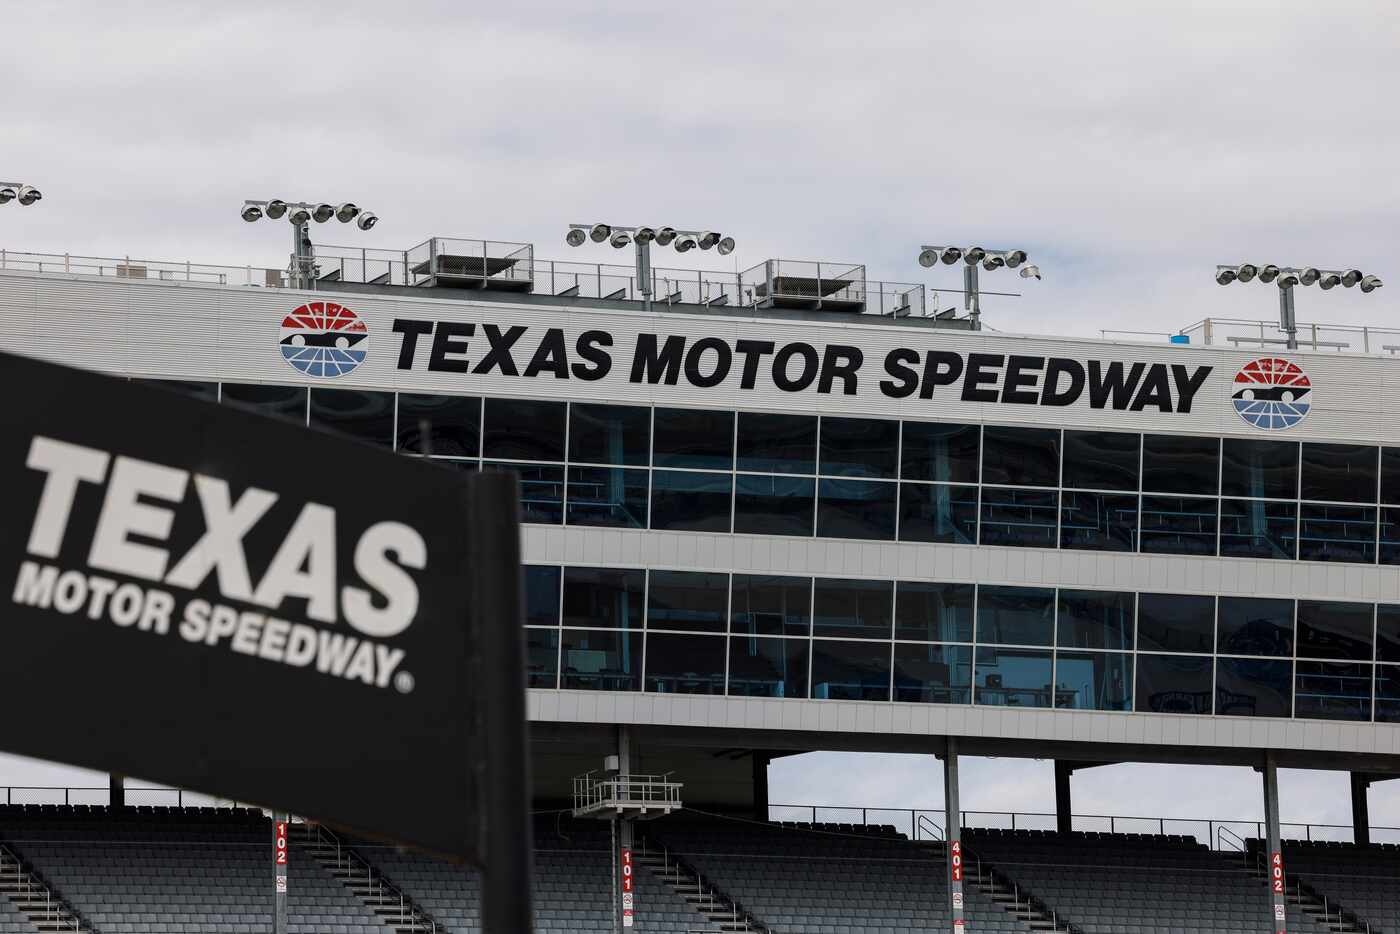 Texas Motor Speedway pictured on Monday, March 7, 2022 in Fort Worth, Texas.